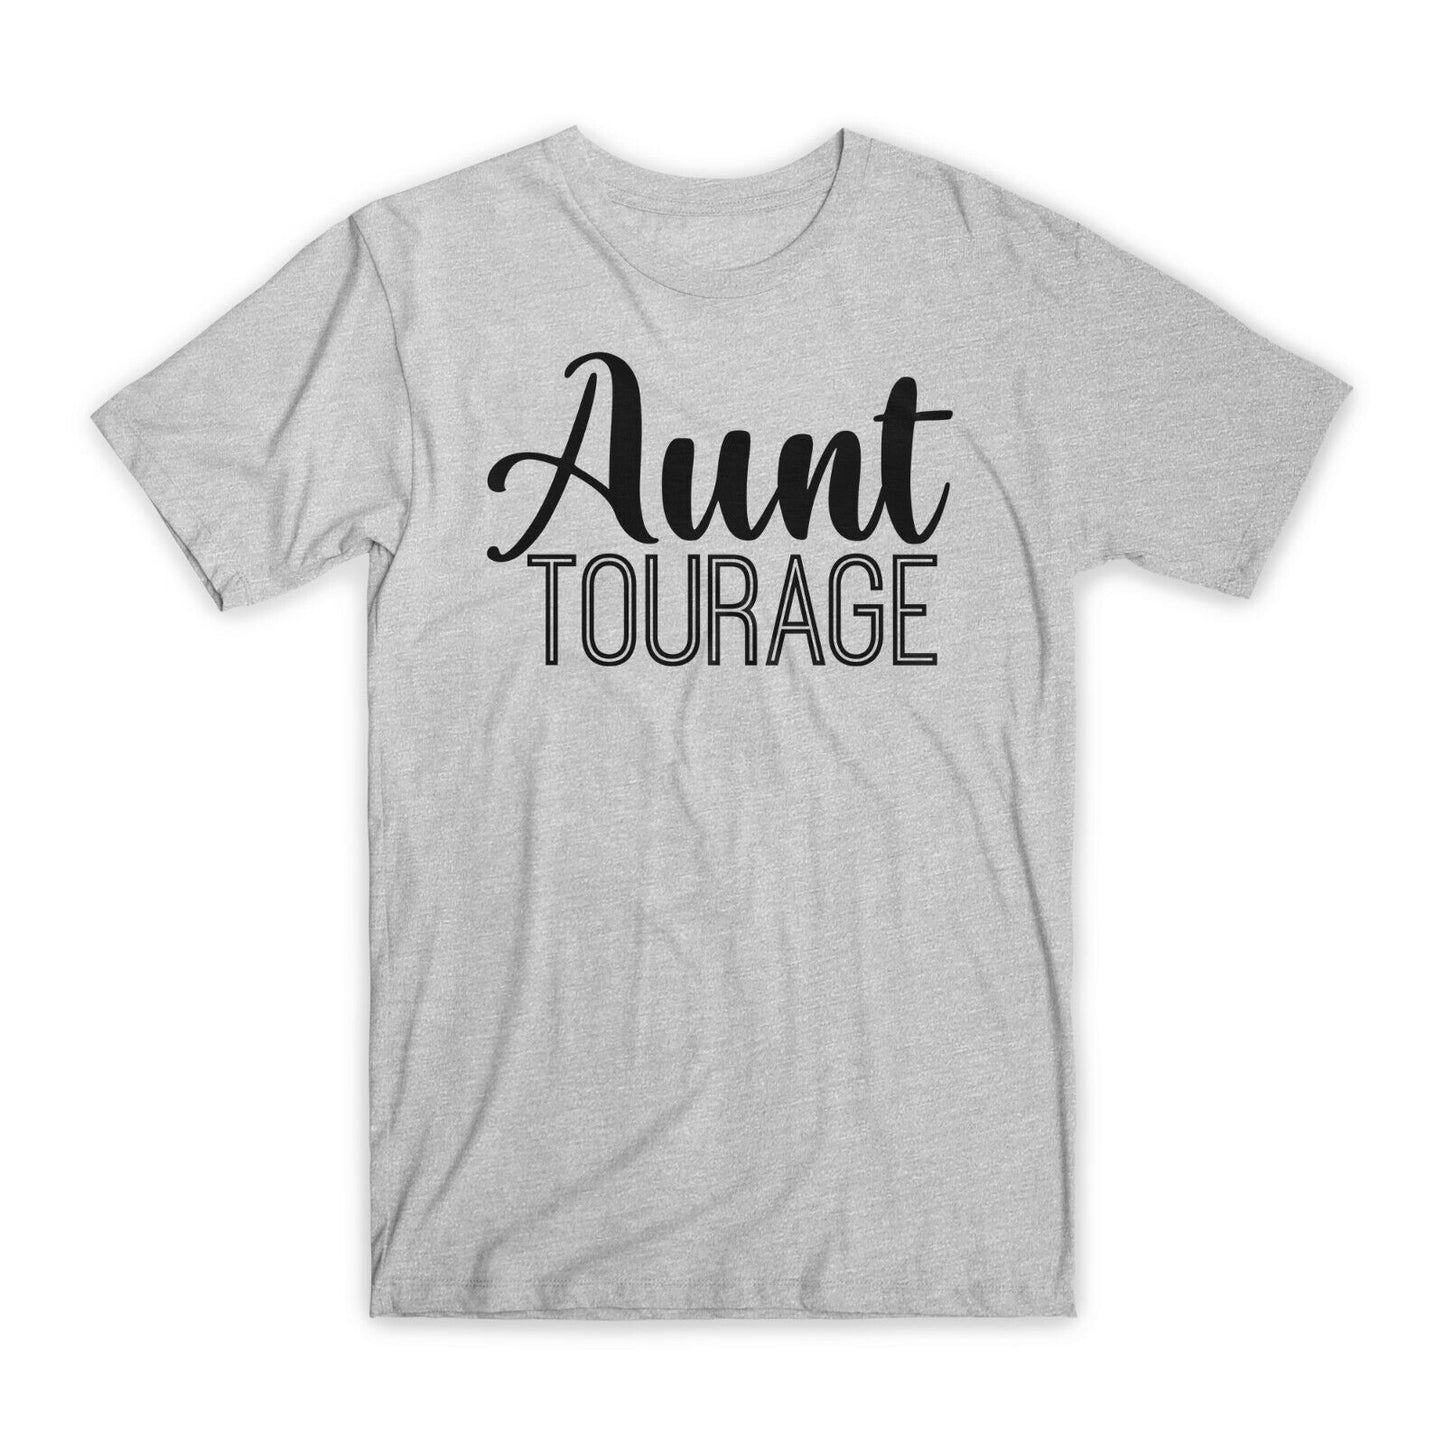 Aunt Tourage T-Shirt Premium Soft Cotton Crew Neck Funny Tees Novelty Gifts NEW